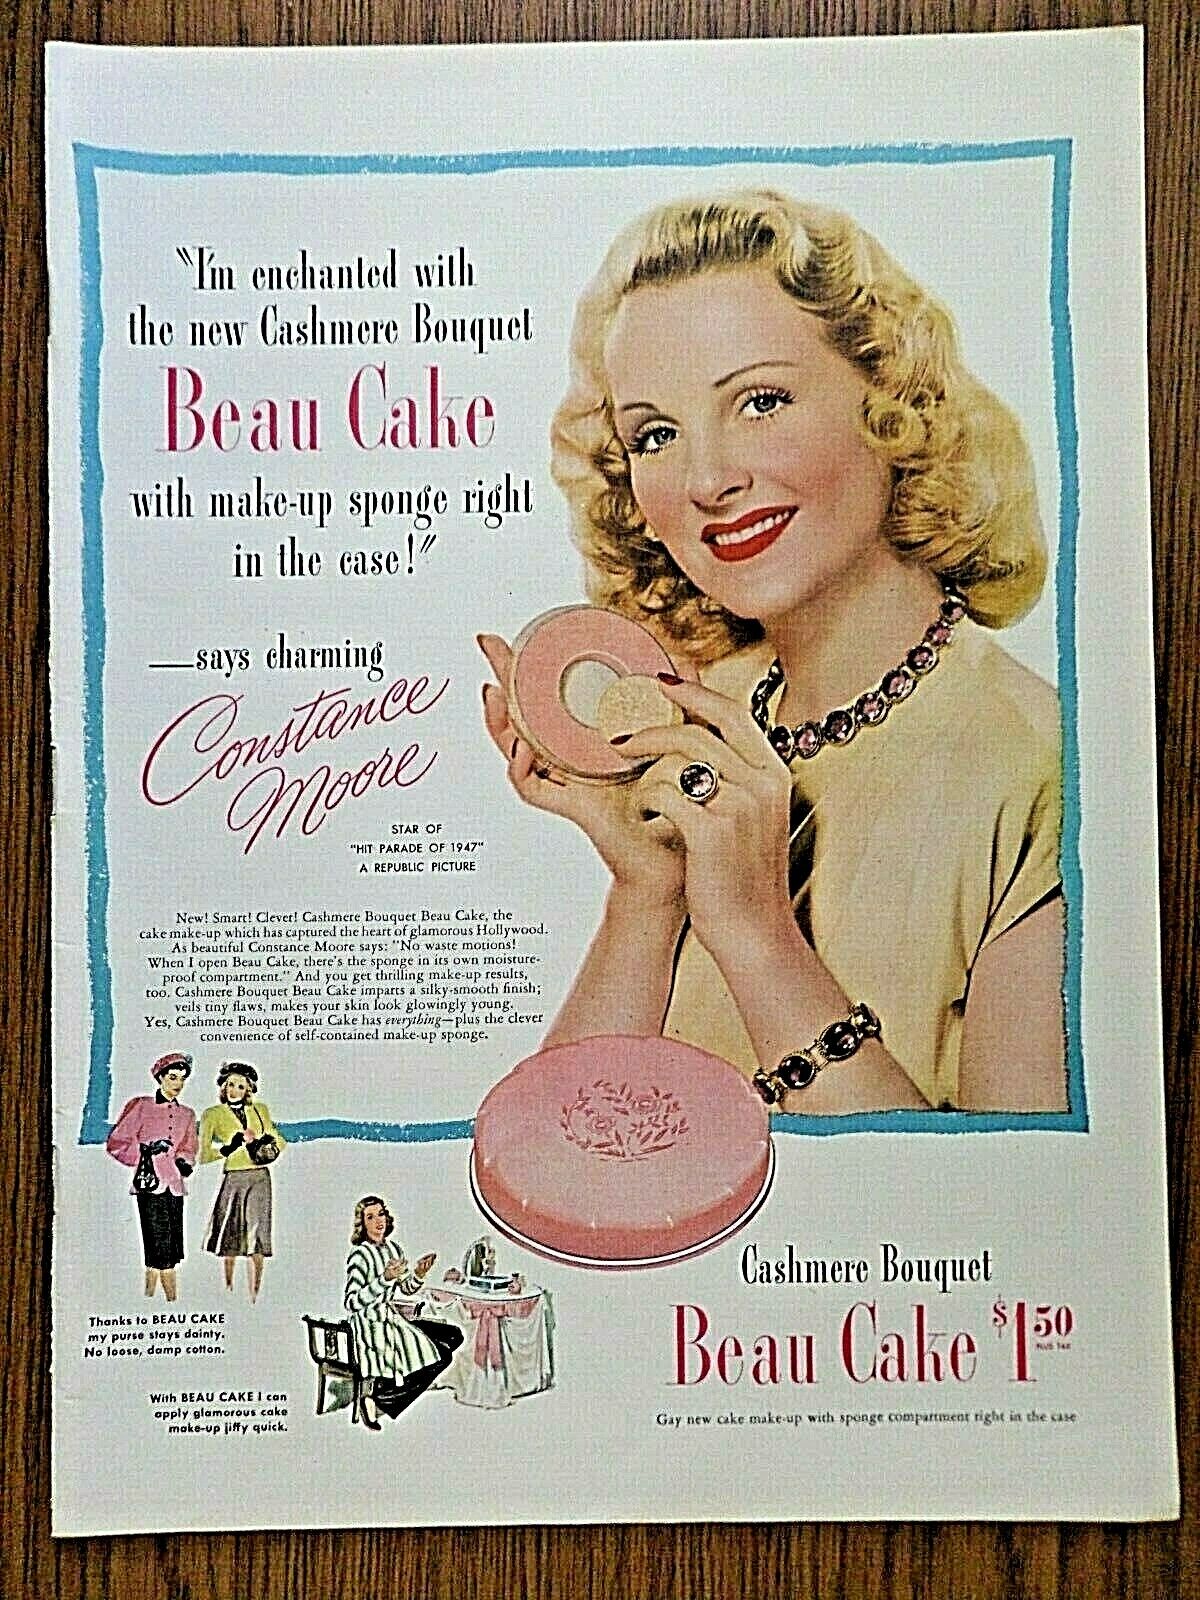 1947 Beau Cake Cashmere Bouquet Ad  Hollywood Movie Star Constance Moore